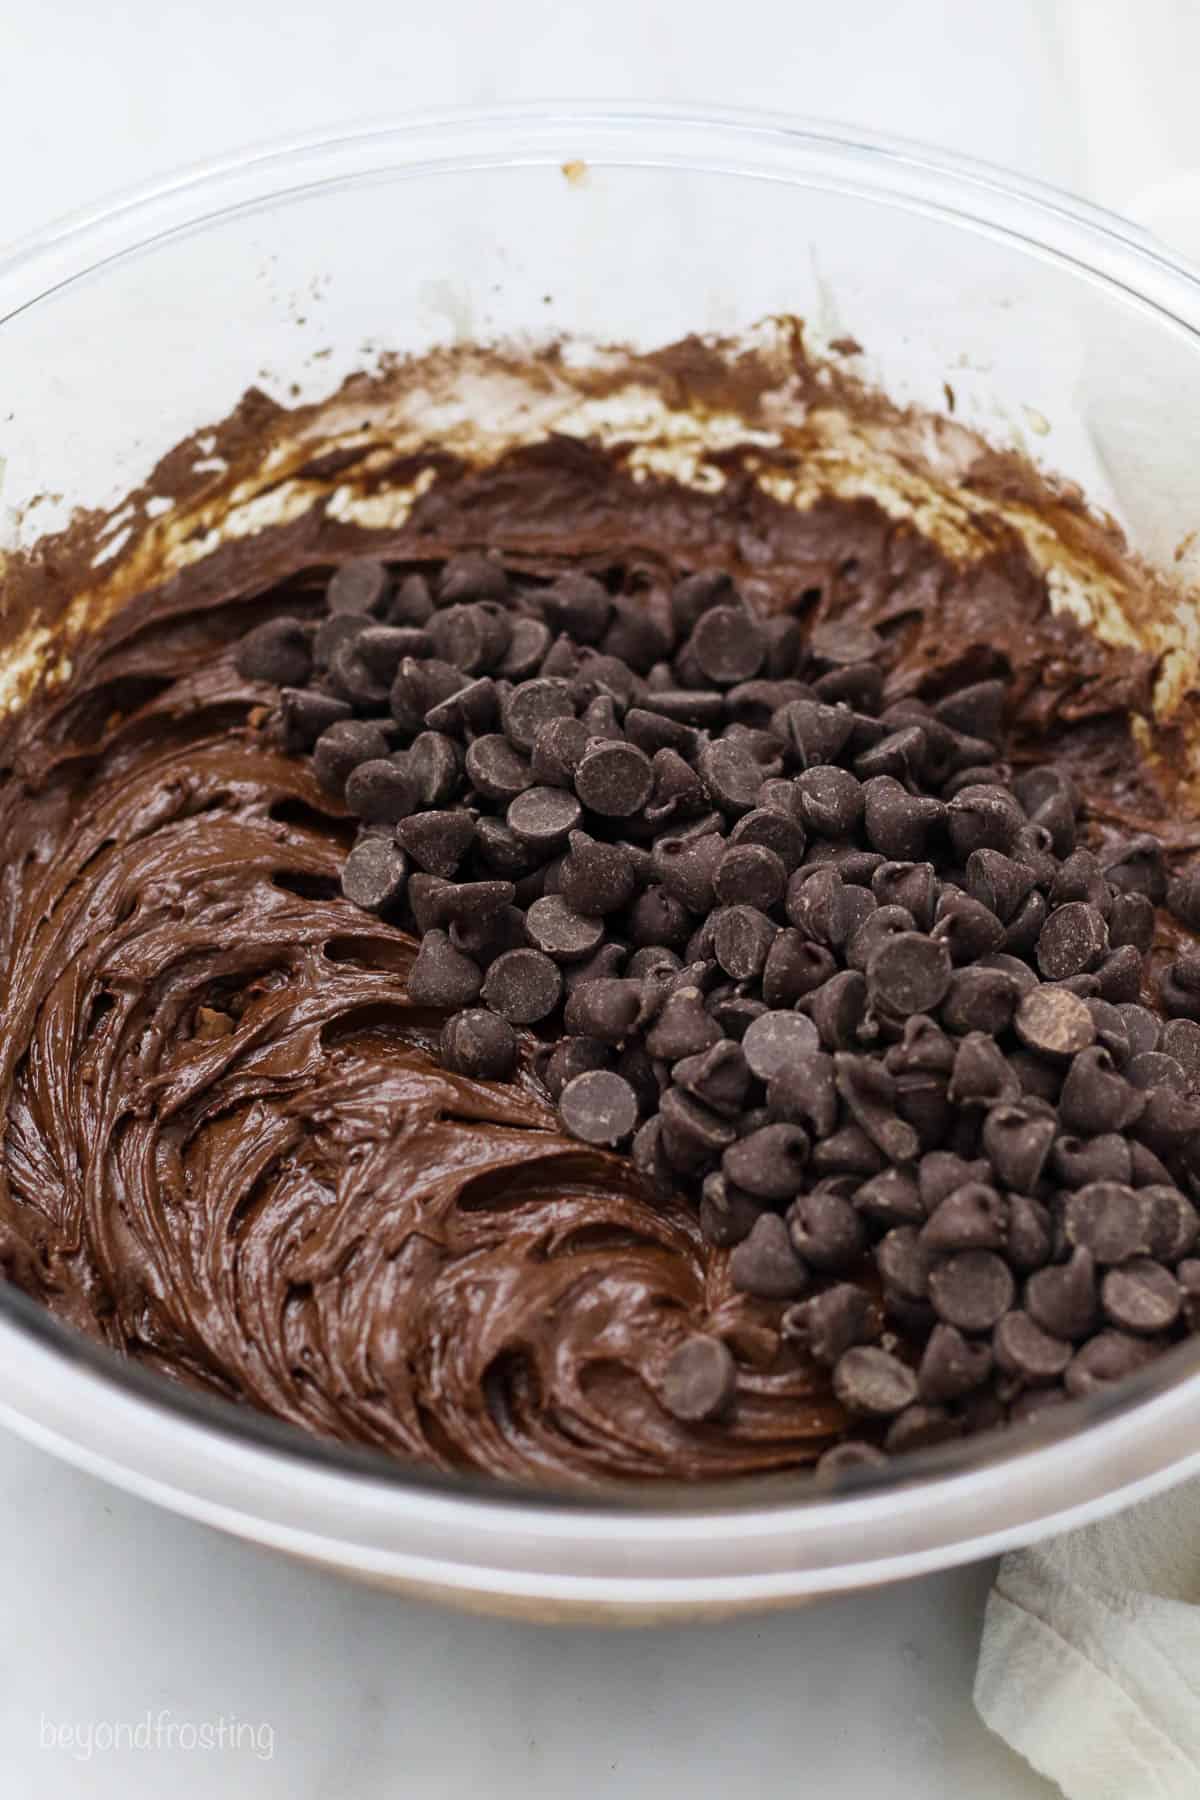 A glass mixing bowl with brownie batter and chocolate chips